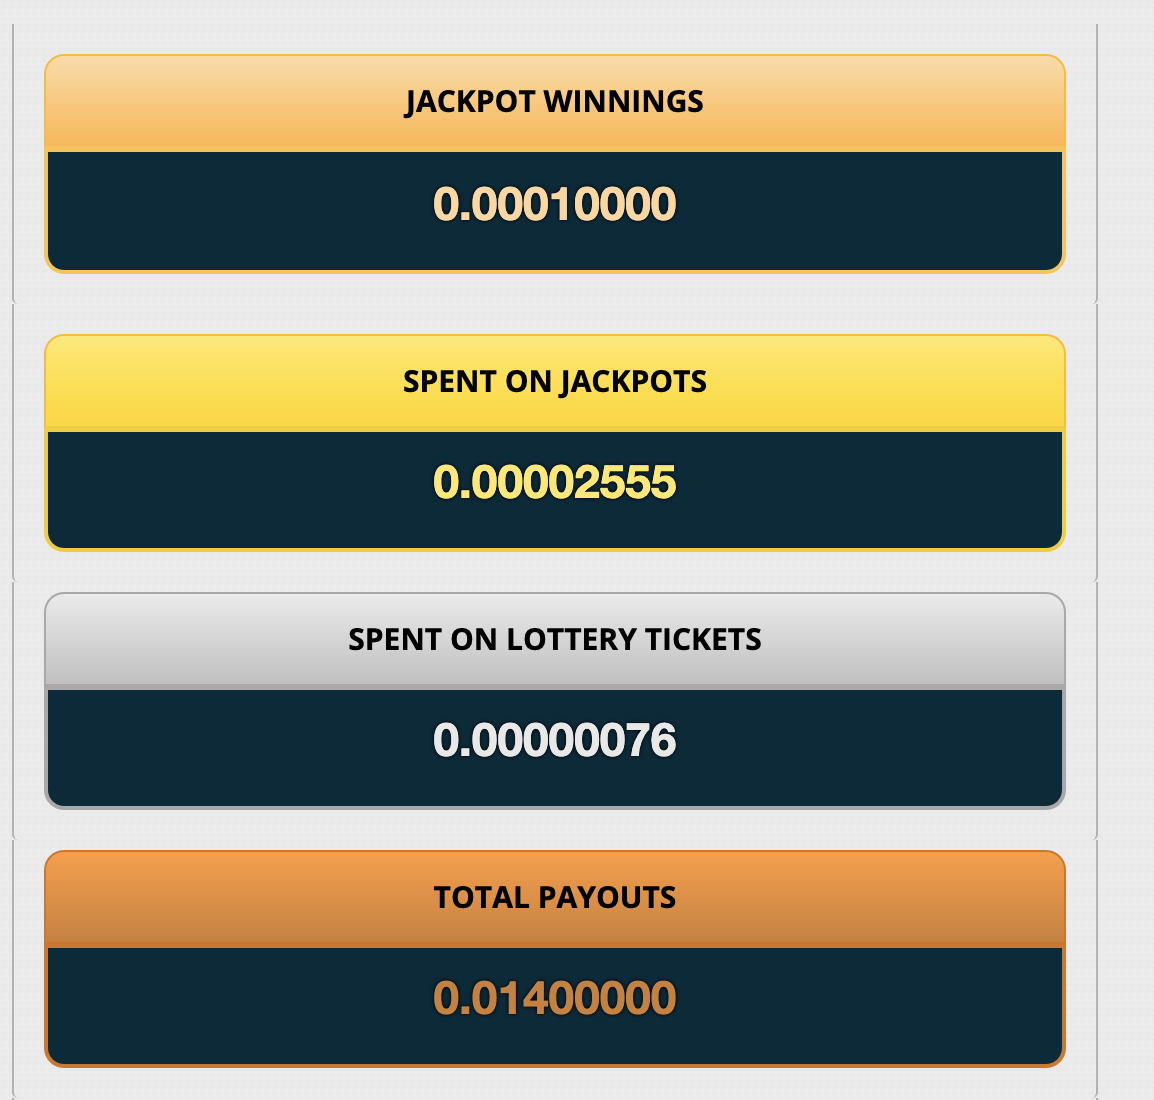 Proof of winnings and withdrawl